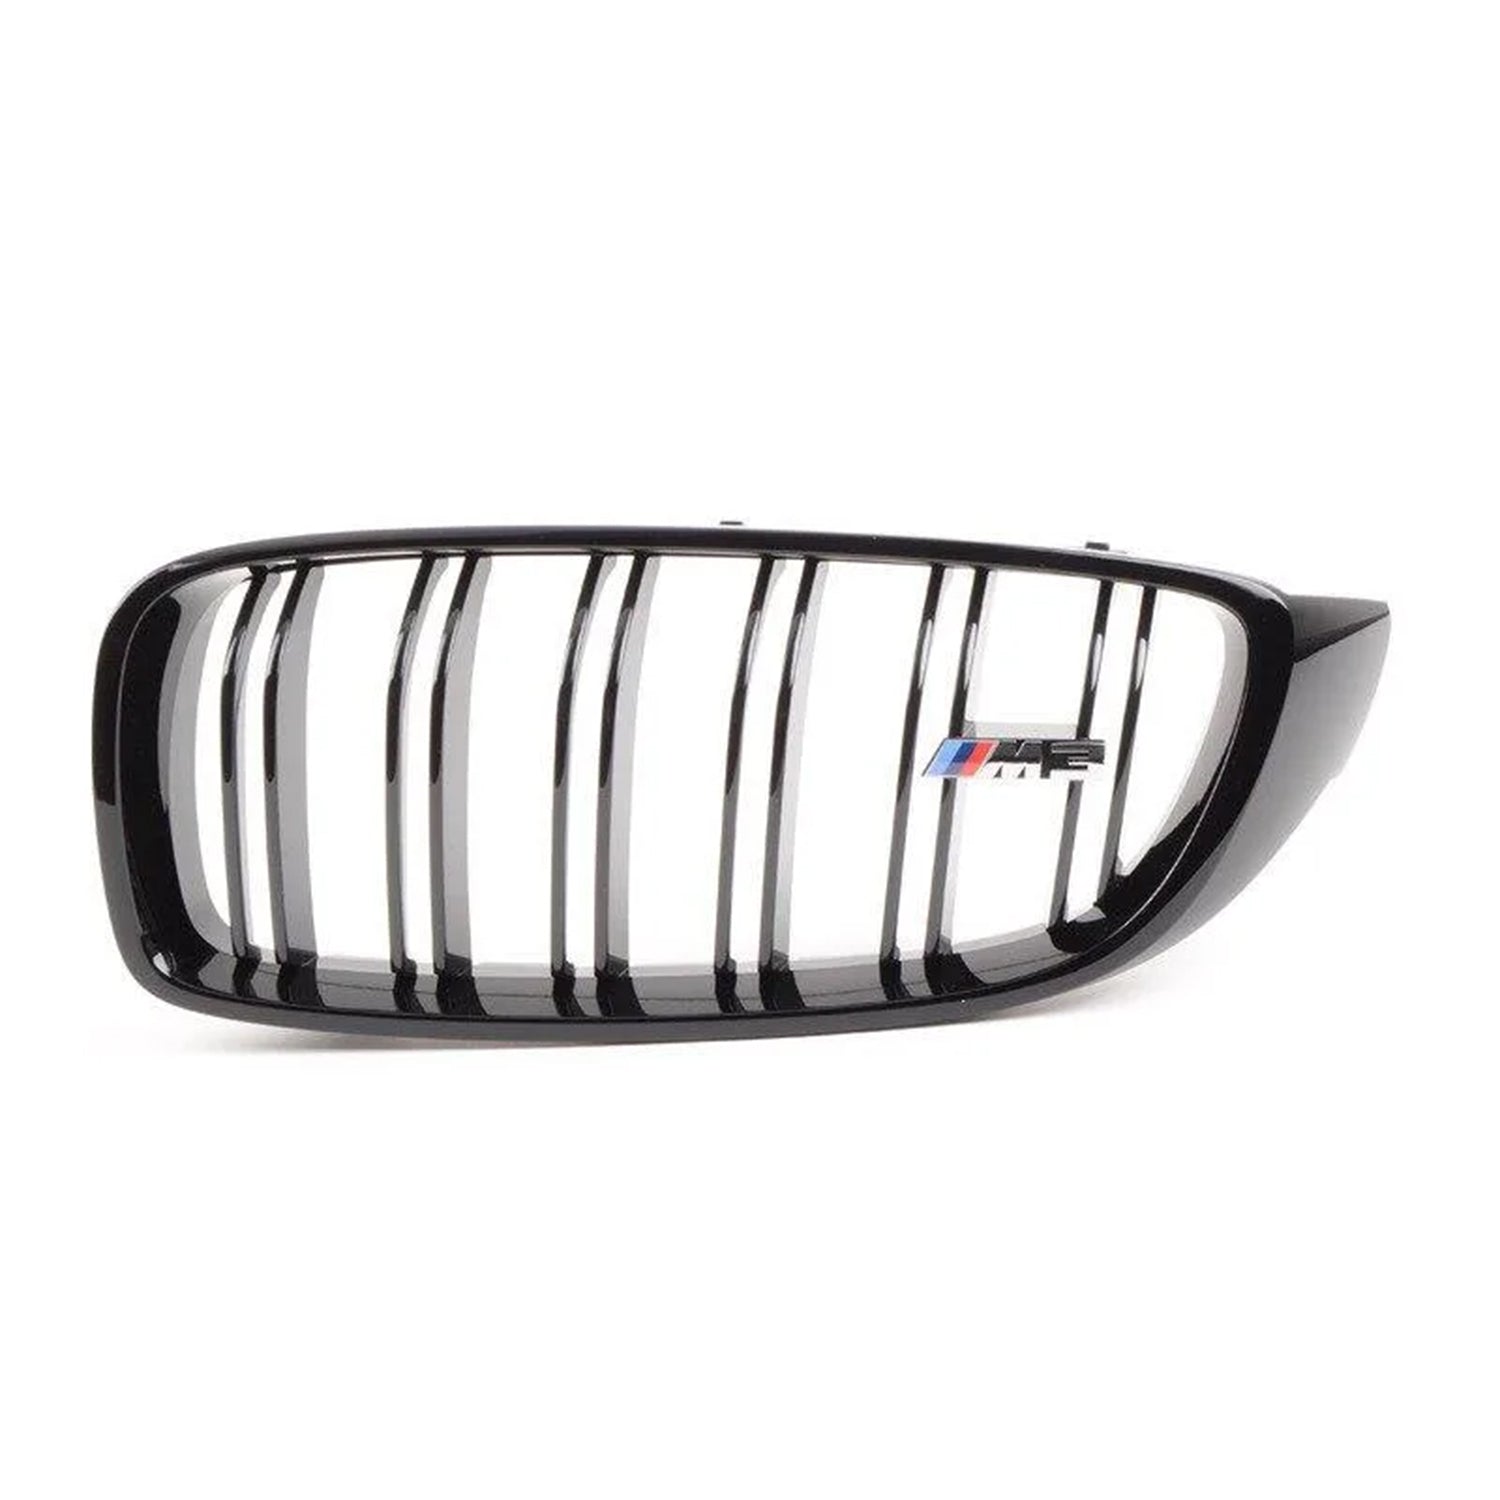 OEM BMW M Performance Gloss Black Front Grilles For F80 M3 51712352812 51712352813